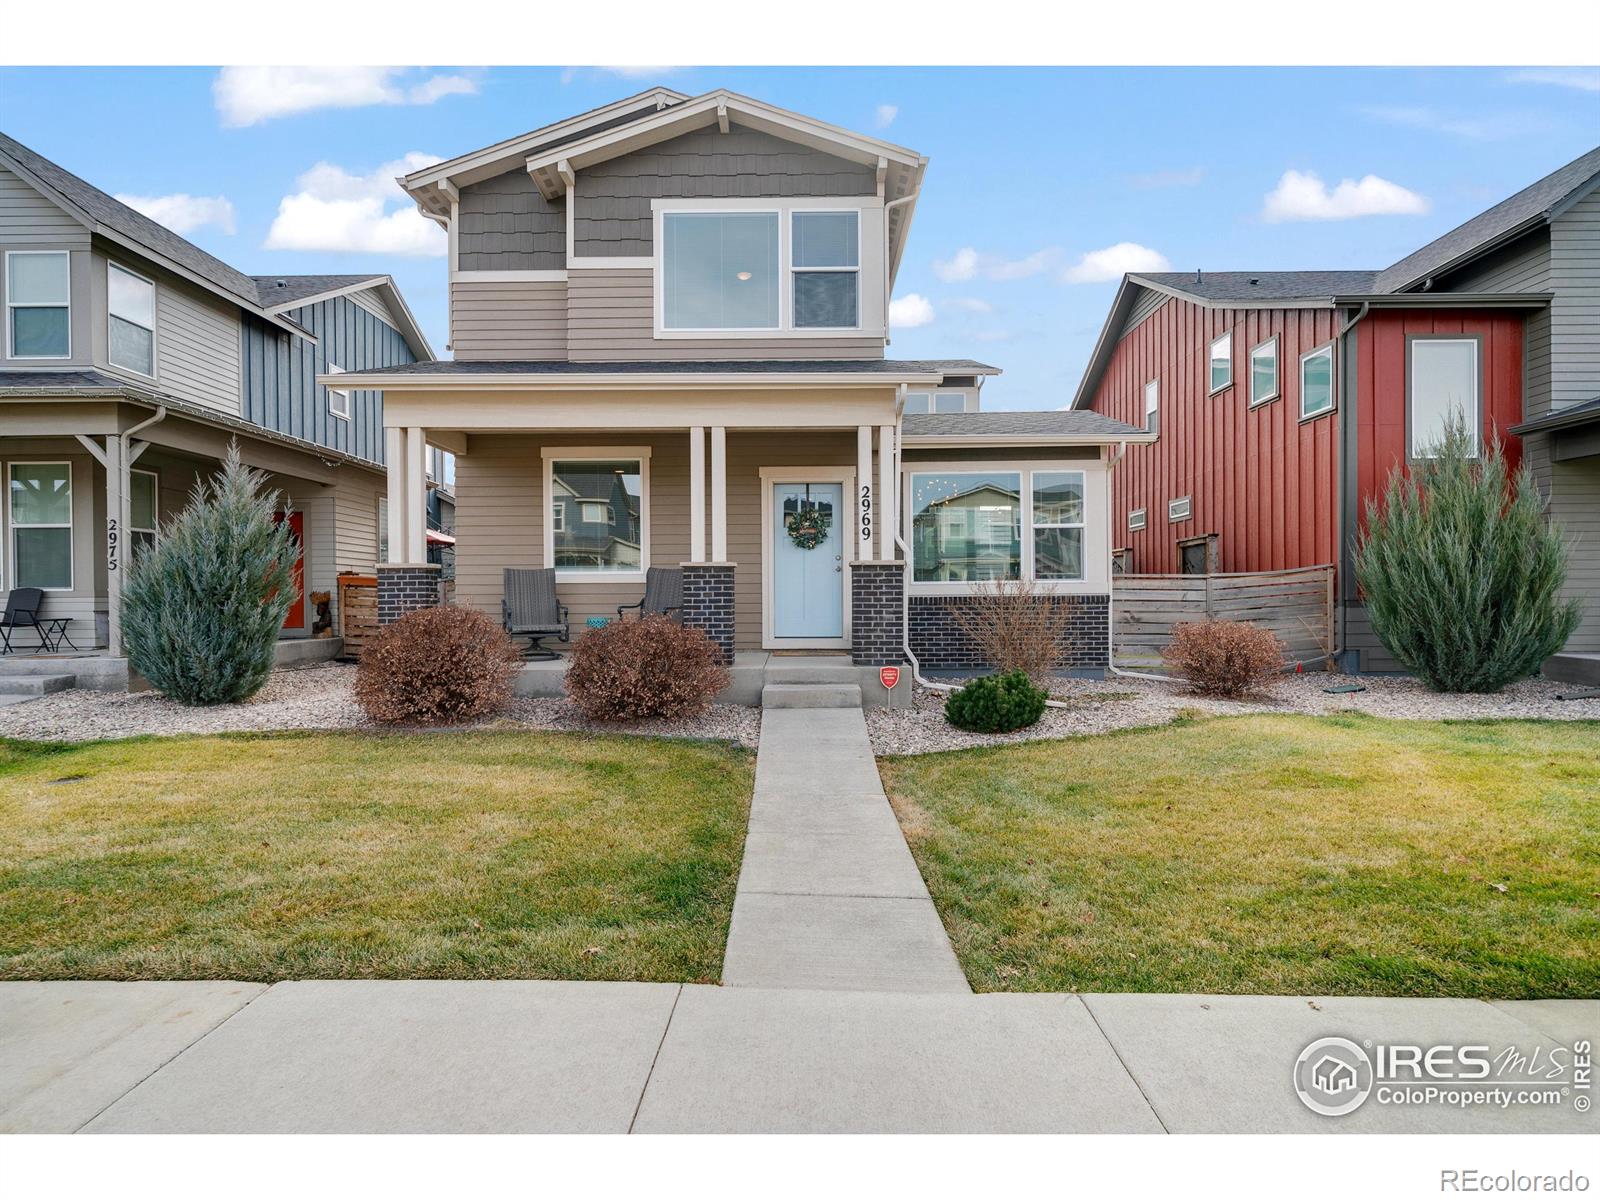 2969  Sykes Drive, fort collins MLS: 4567891001694 Beds: 3 Baths: 3 Price: $618,000